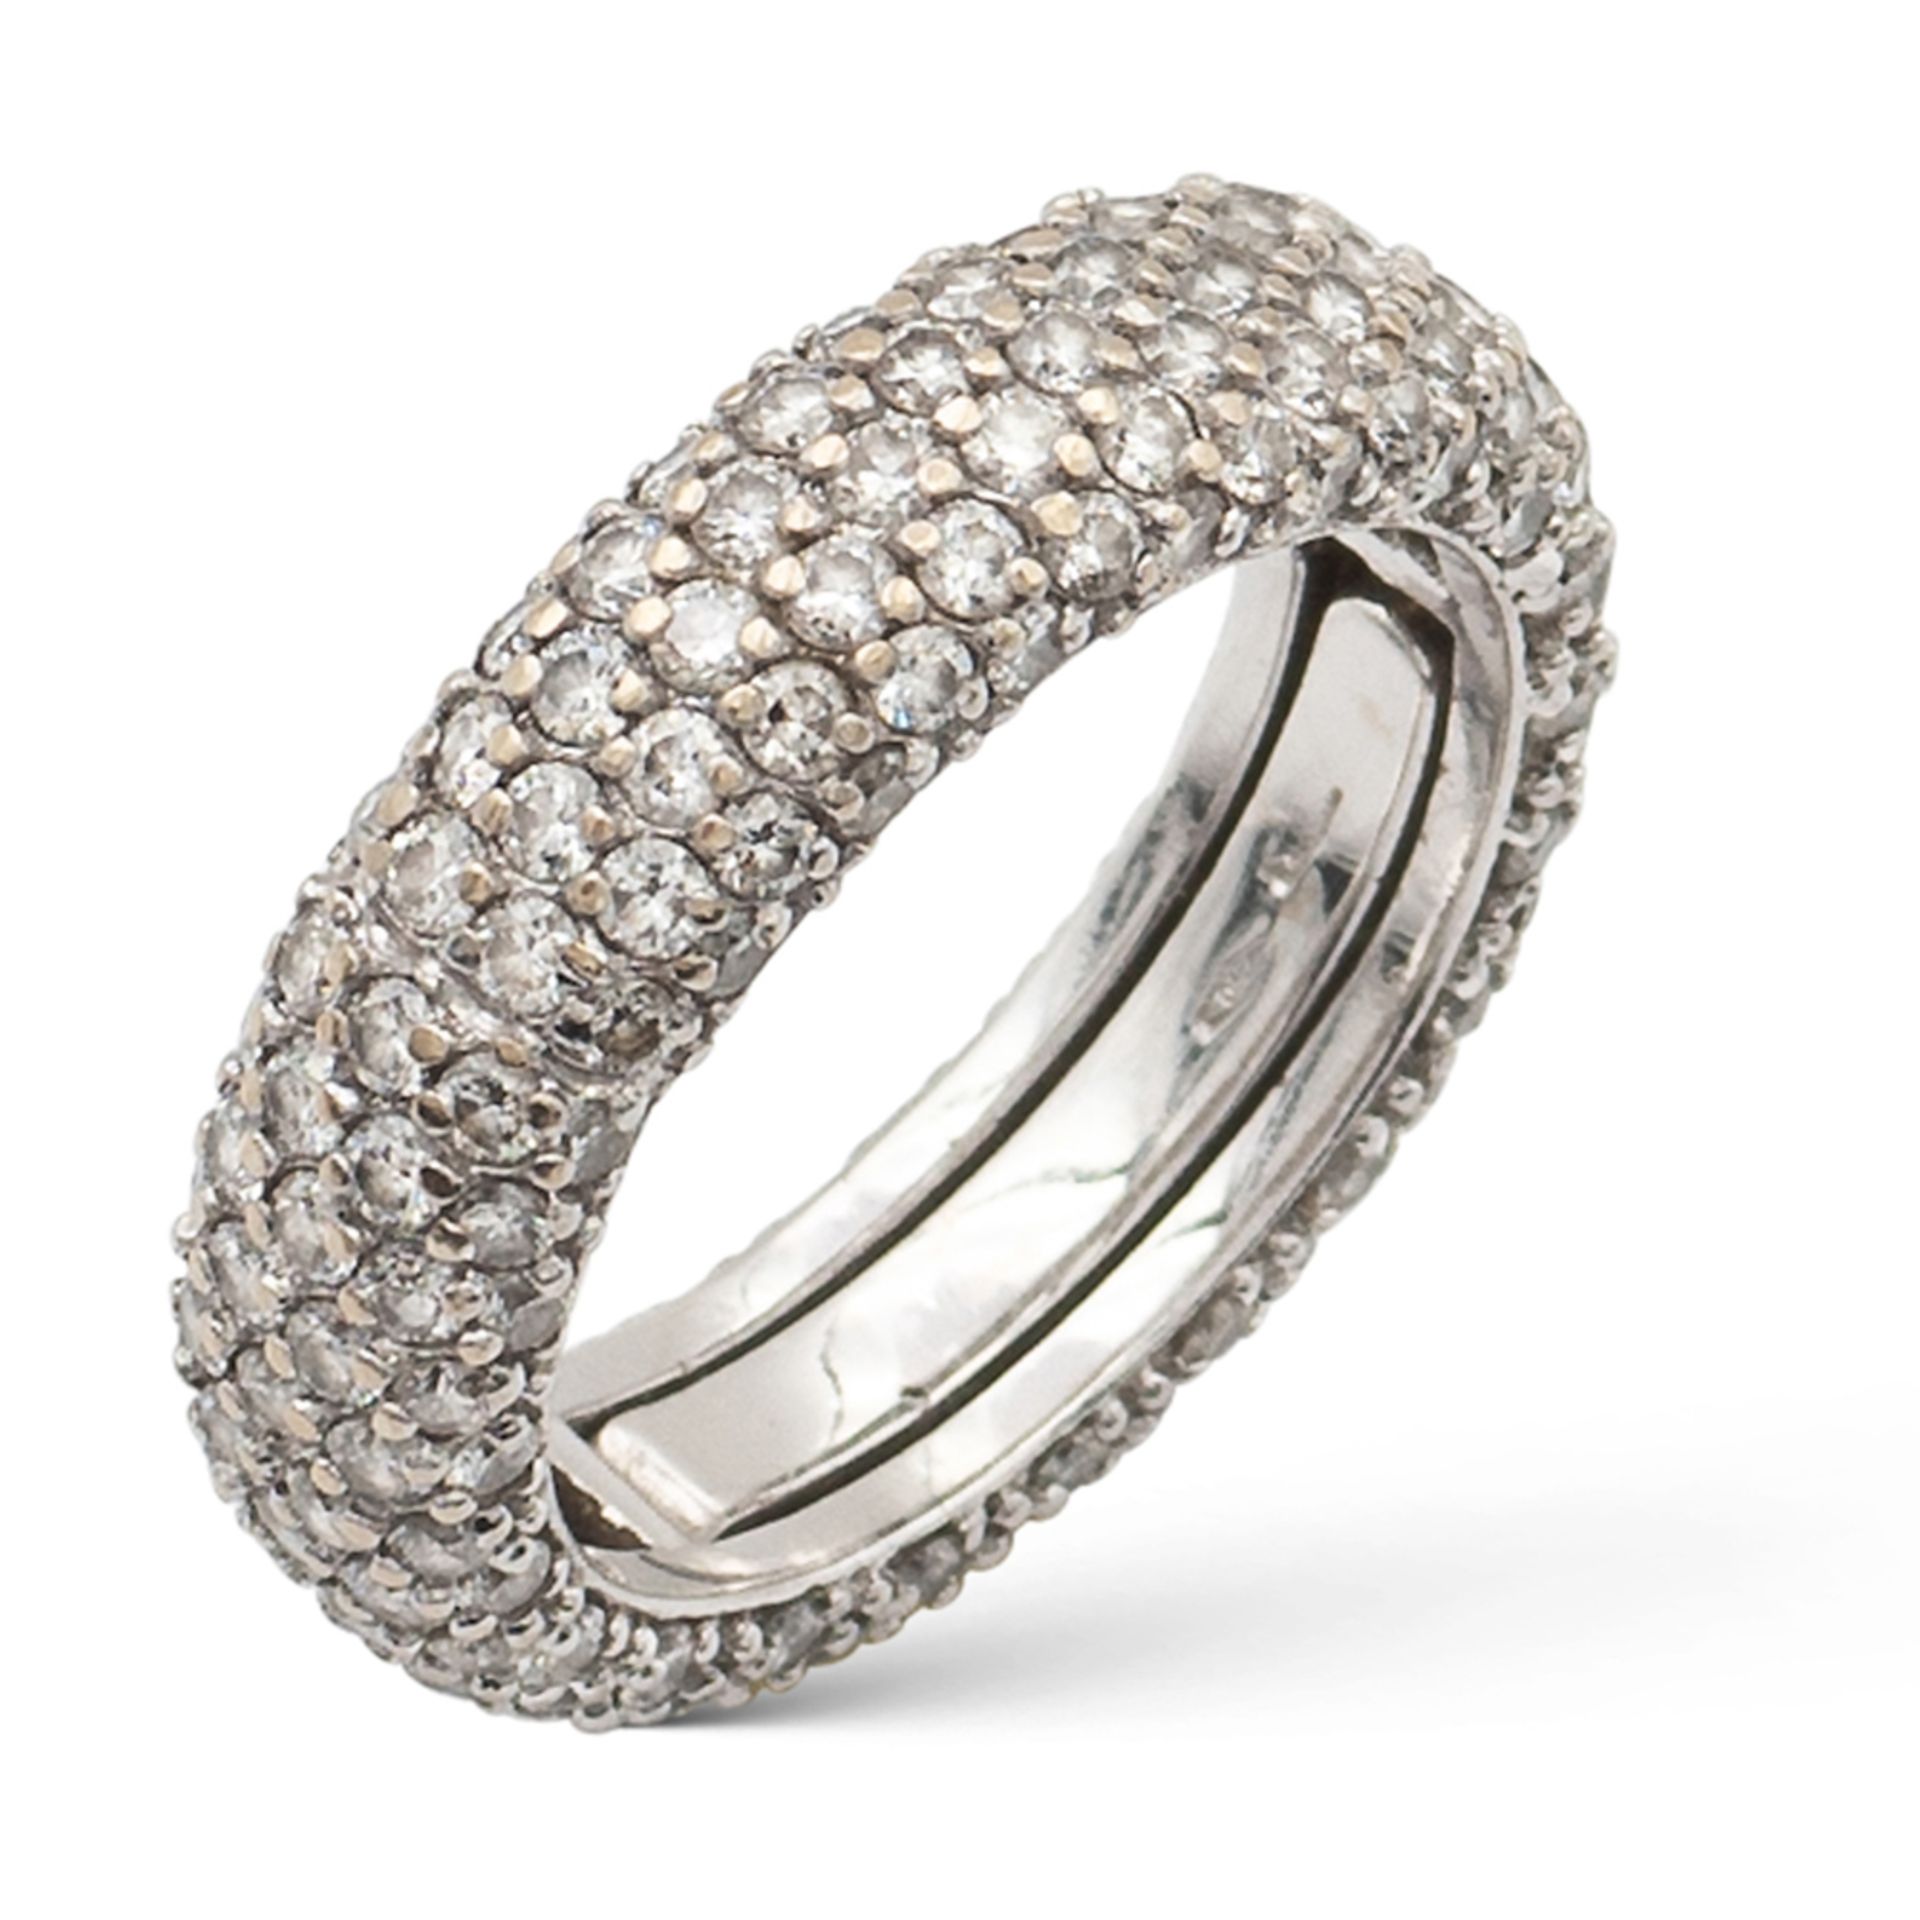 18kt white gold and diamond pavè ring weight 5,2 gr.